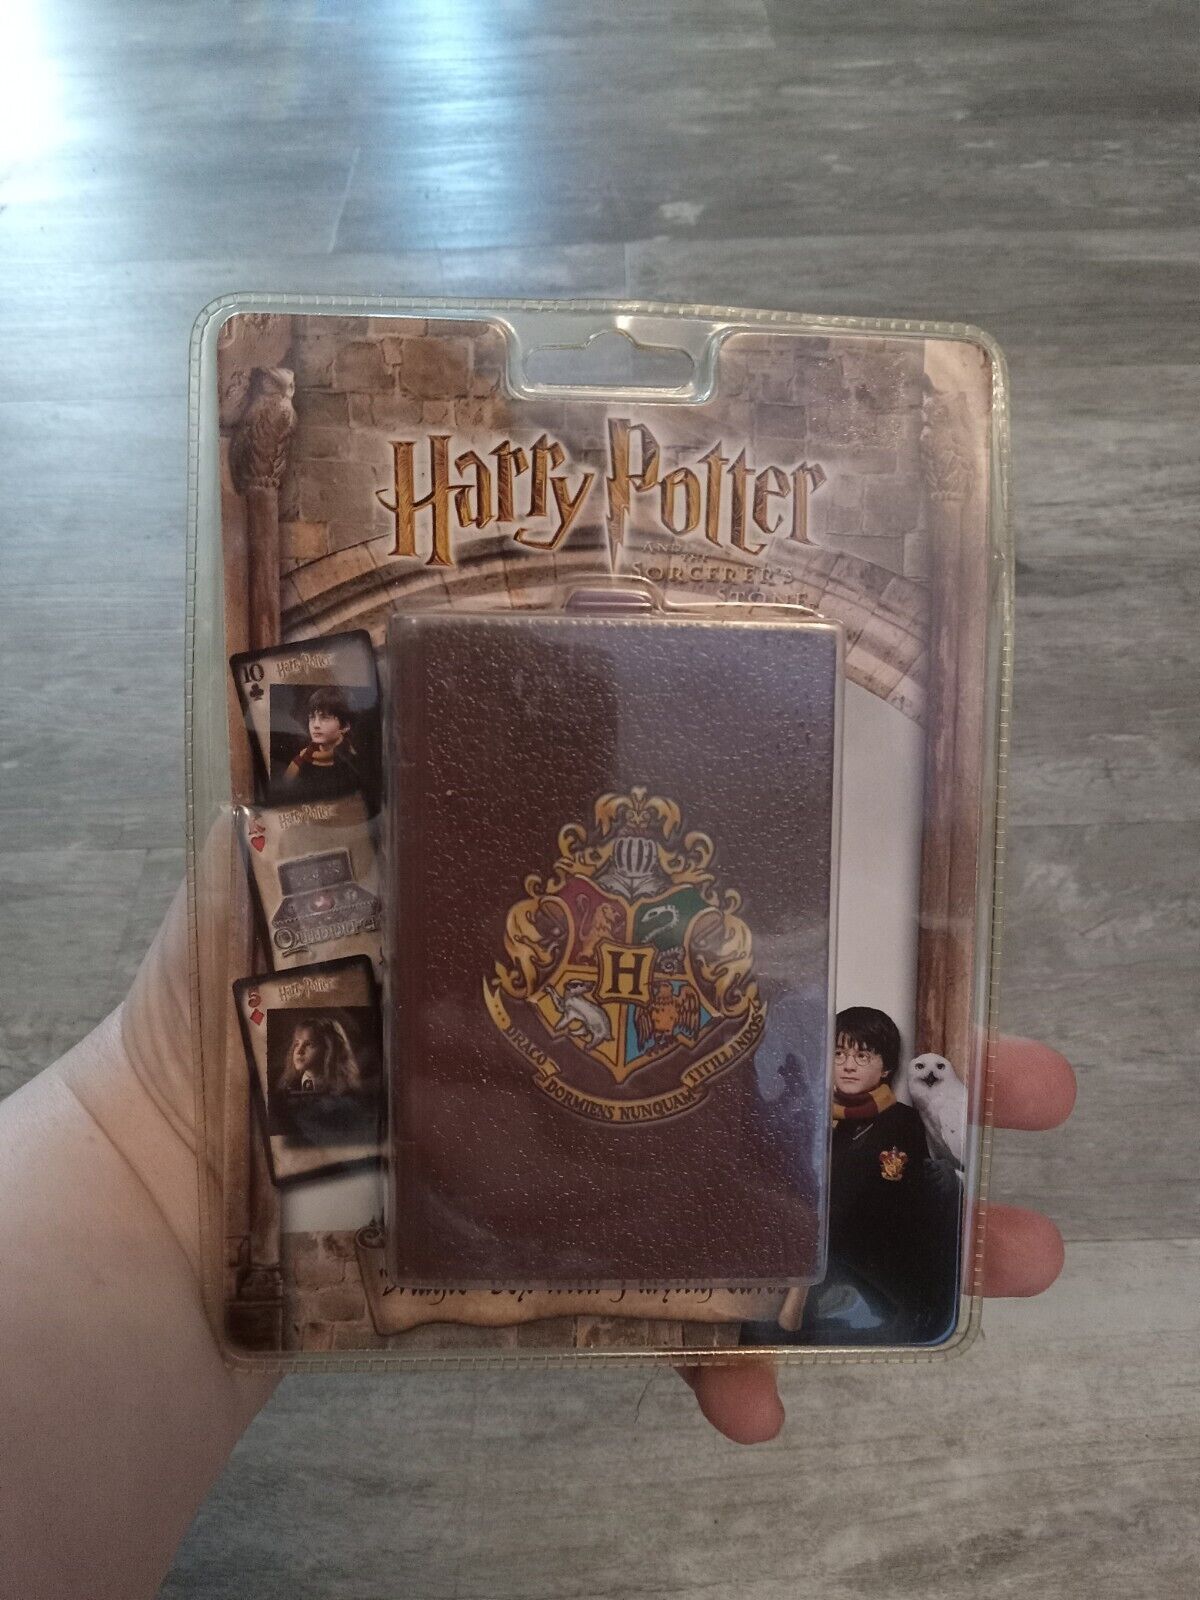 Harry Potter Magic Box with Playing Cards, Bicycle, Sorcerer's Stone - Sealed